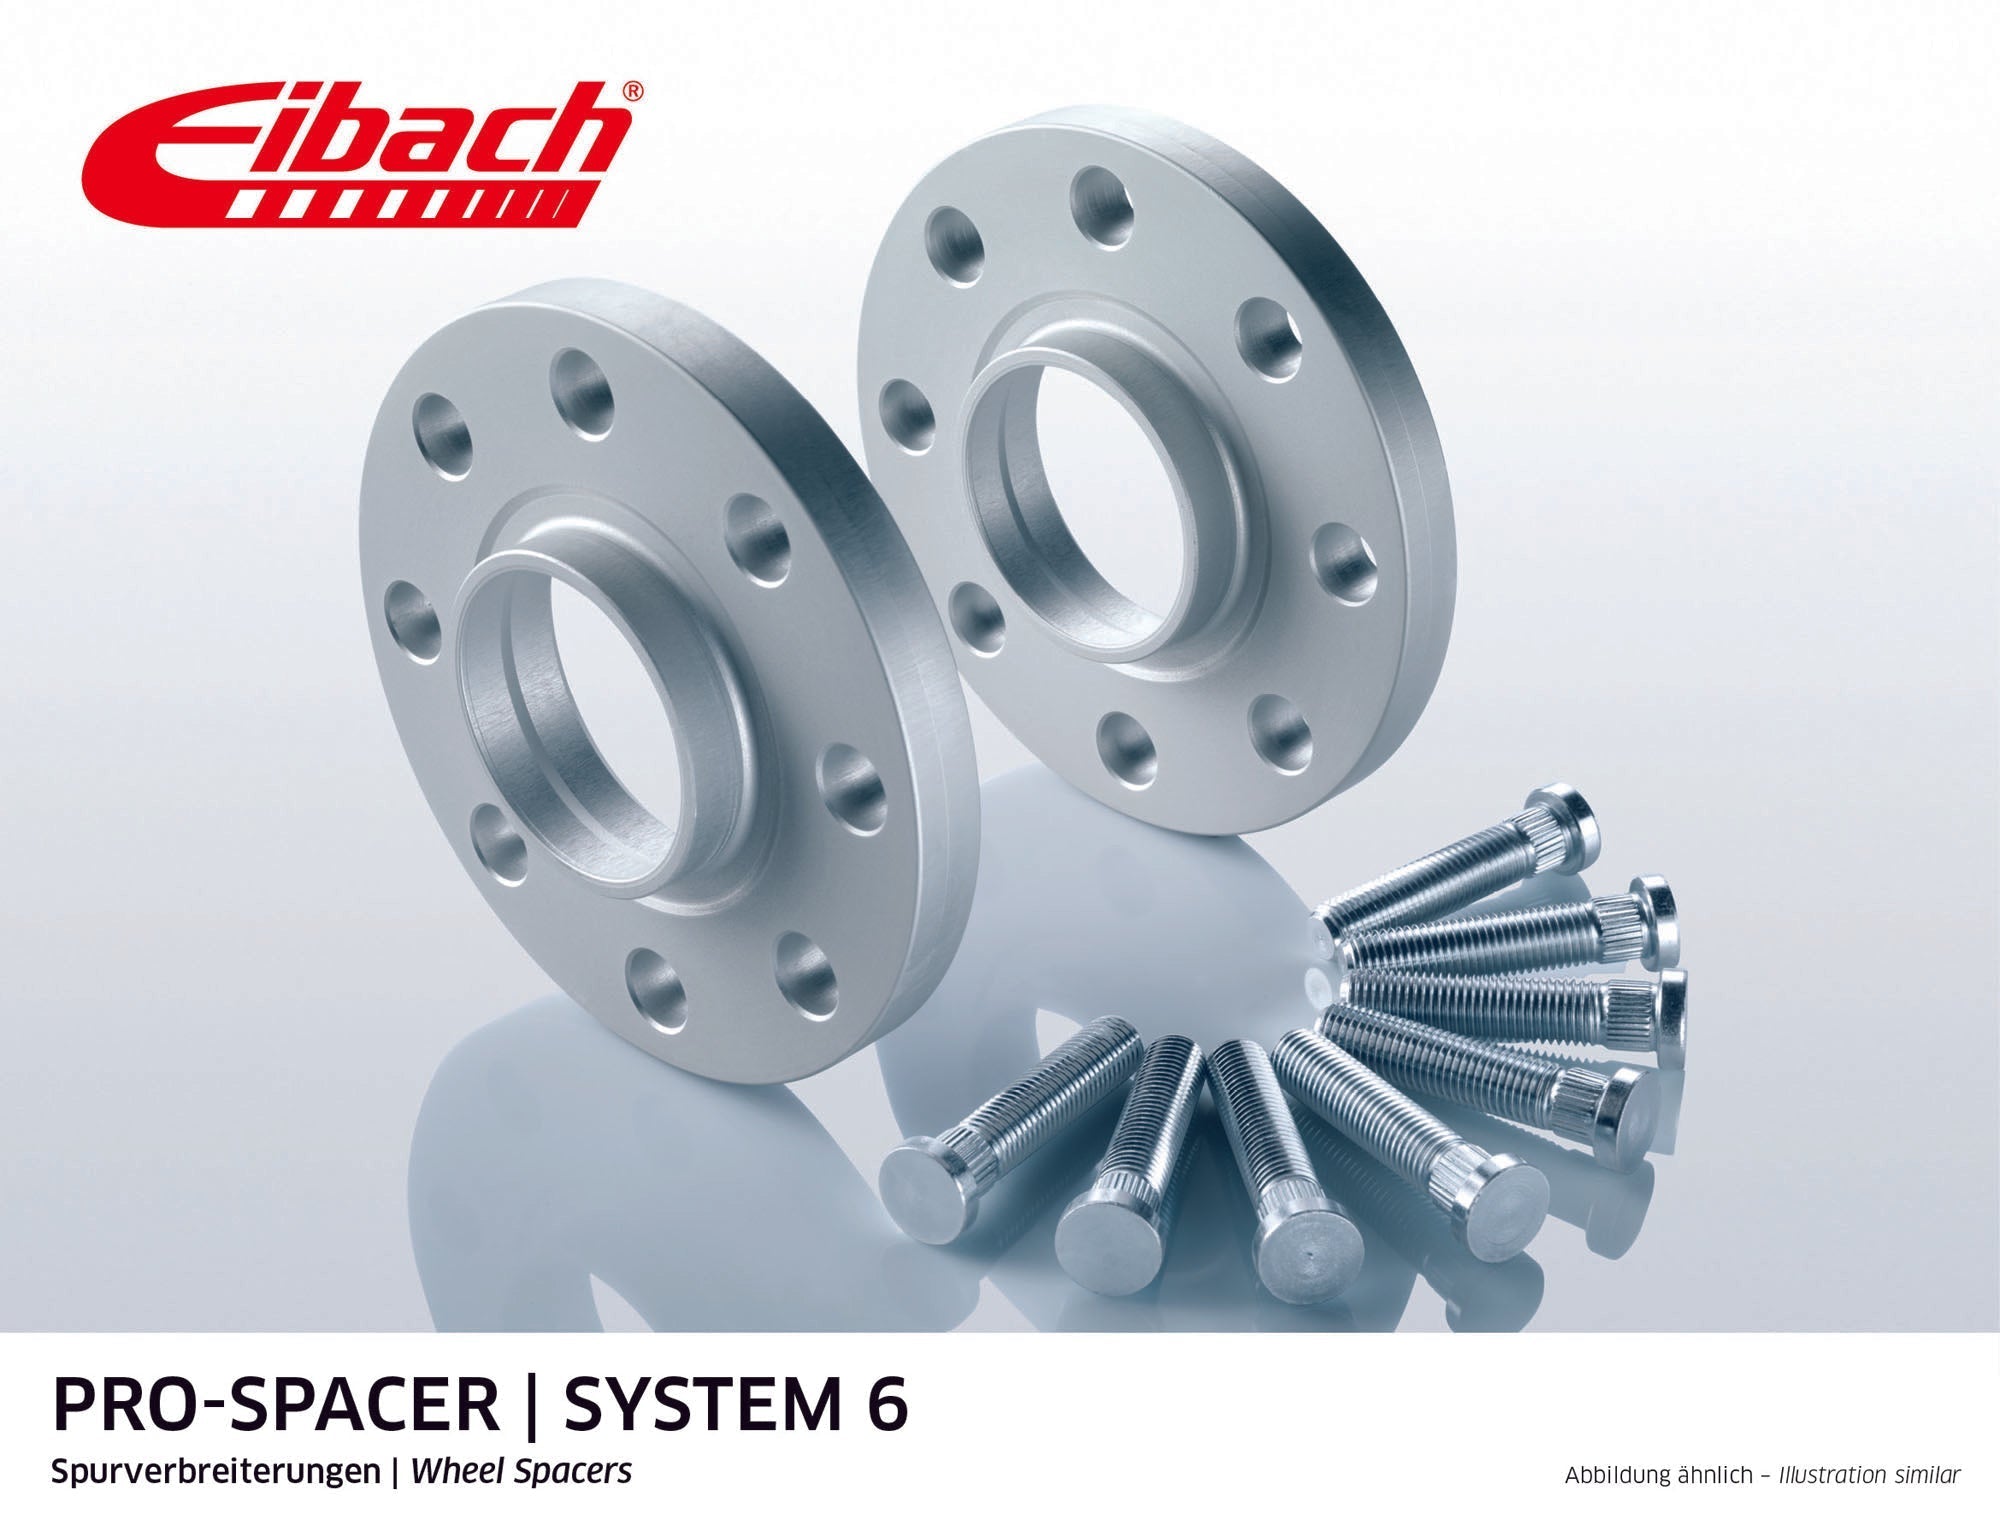 Eibach 18mm Pro-Spacer - Silver Anodized Wheel Spacer 911 1988-94 #S90-6-18-001